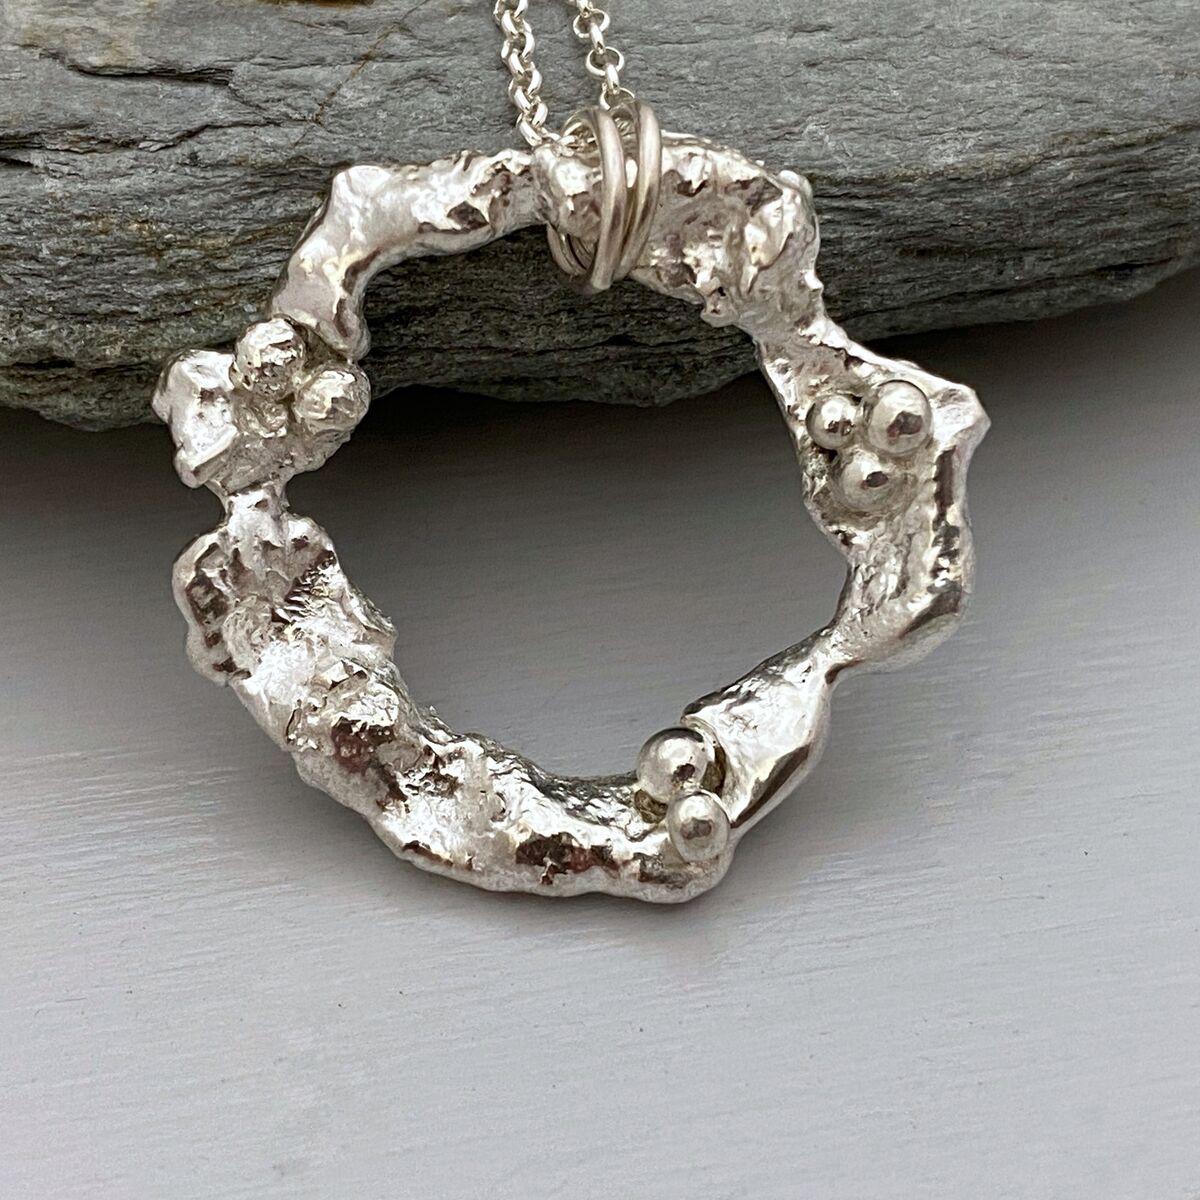 Organic silver necklace